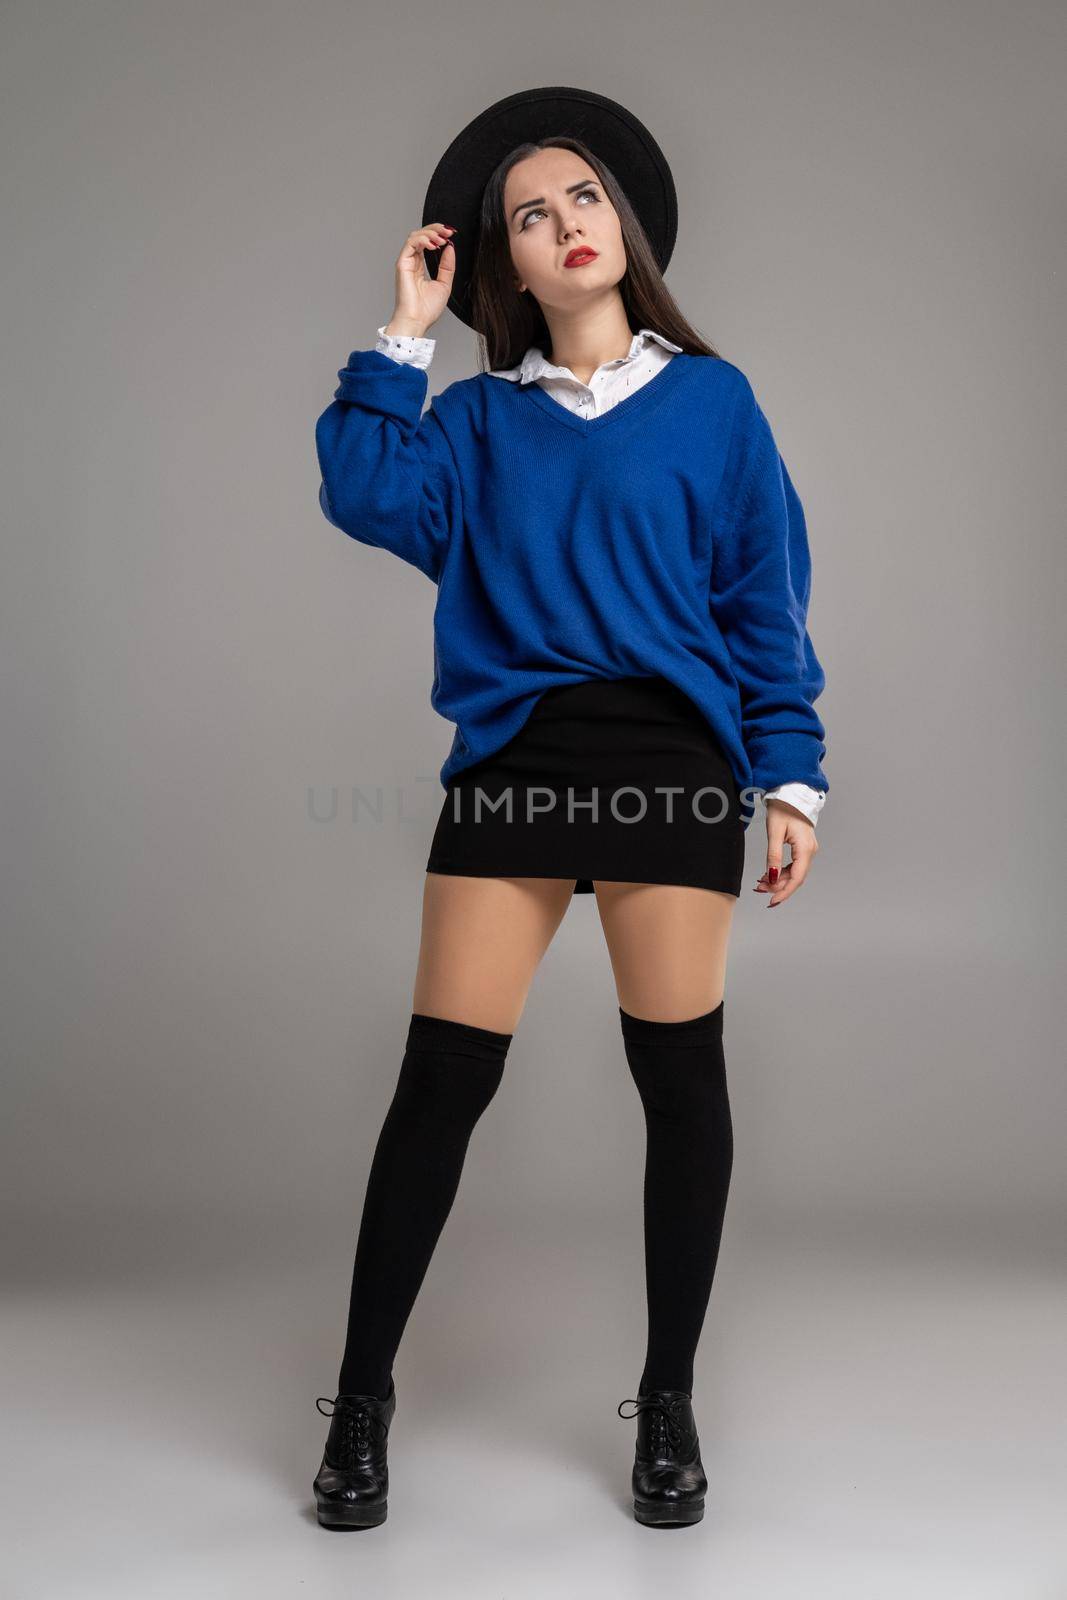 Full length portrait of an alluring girl holding her hat and looking up while posing at studio against a gray background. She is weared in a oversize blue blouse, black skirt, stockings and boots. Fashion shot. Sincere emotions concept.